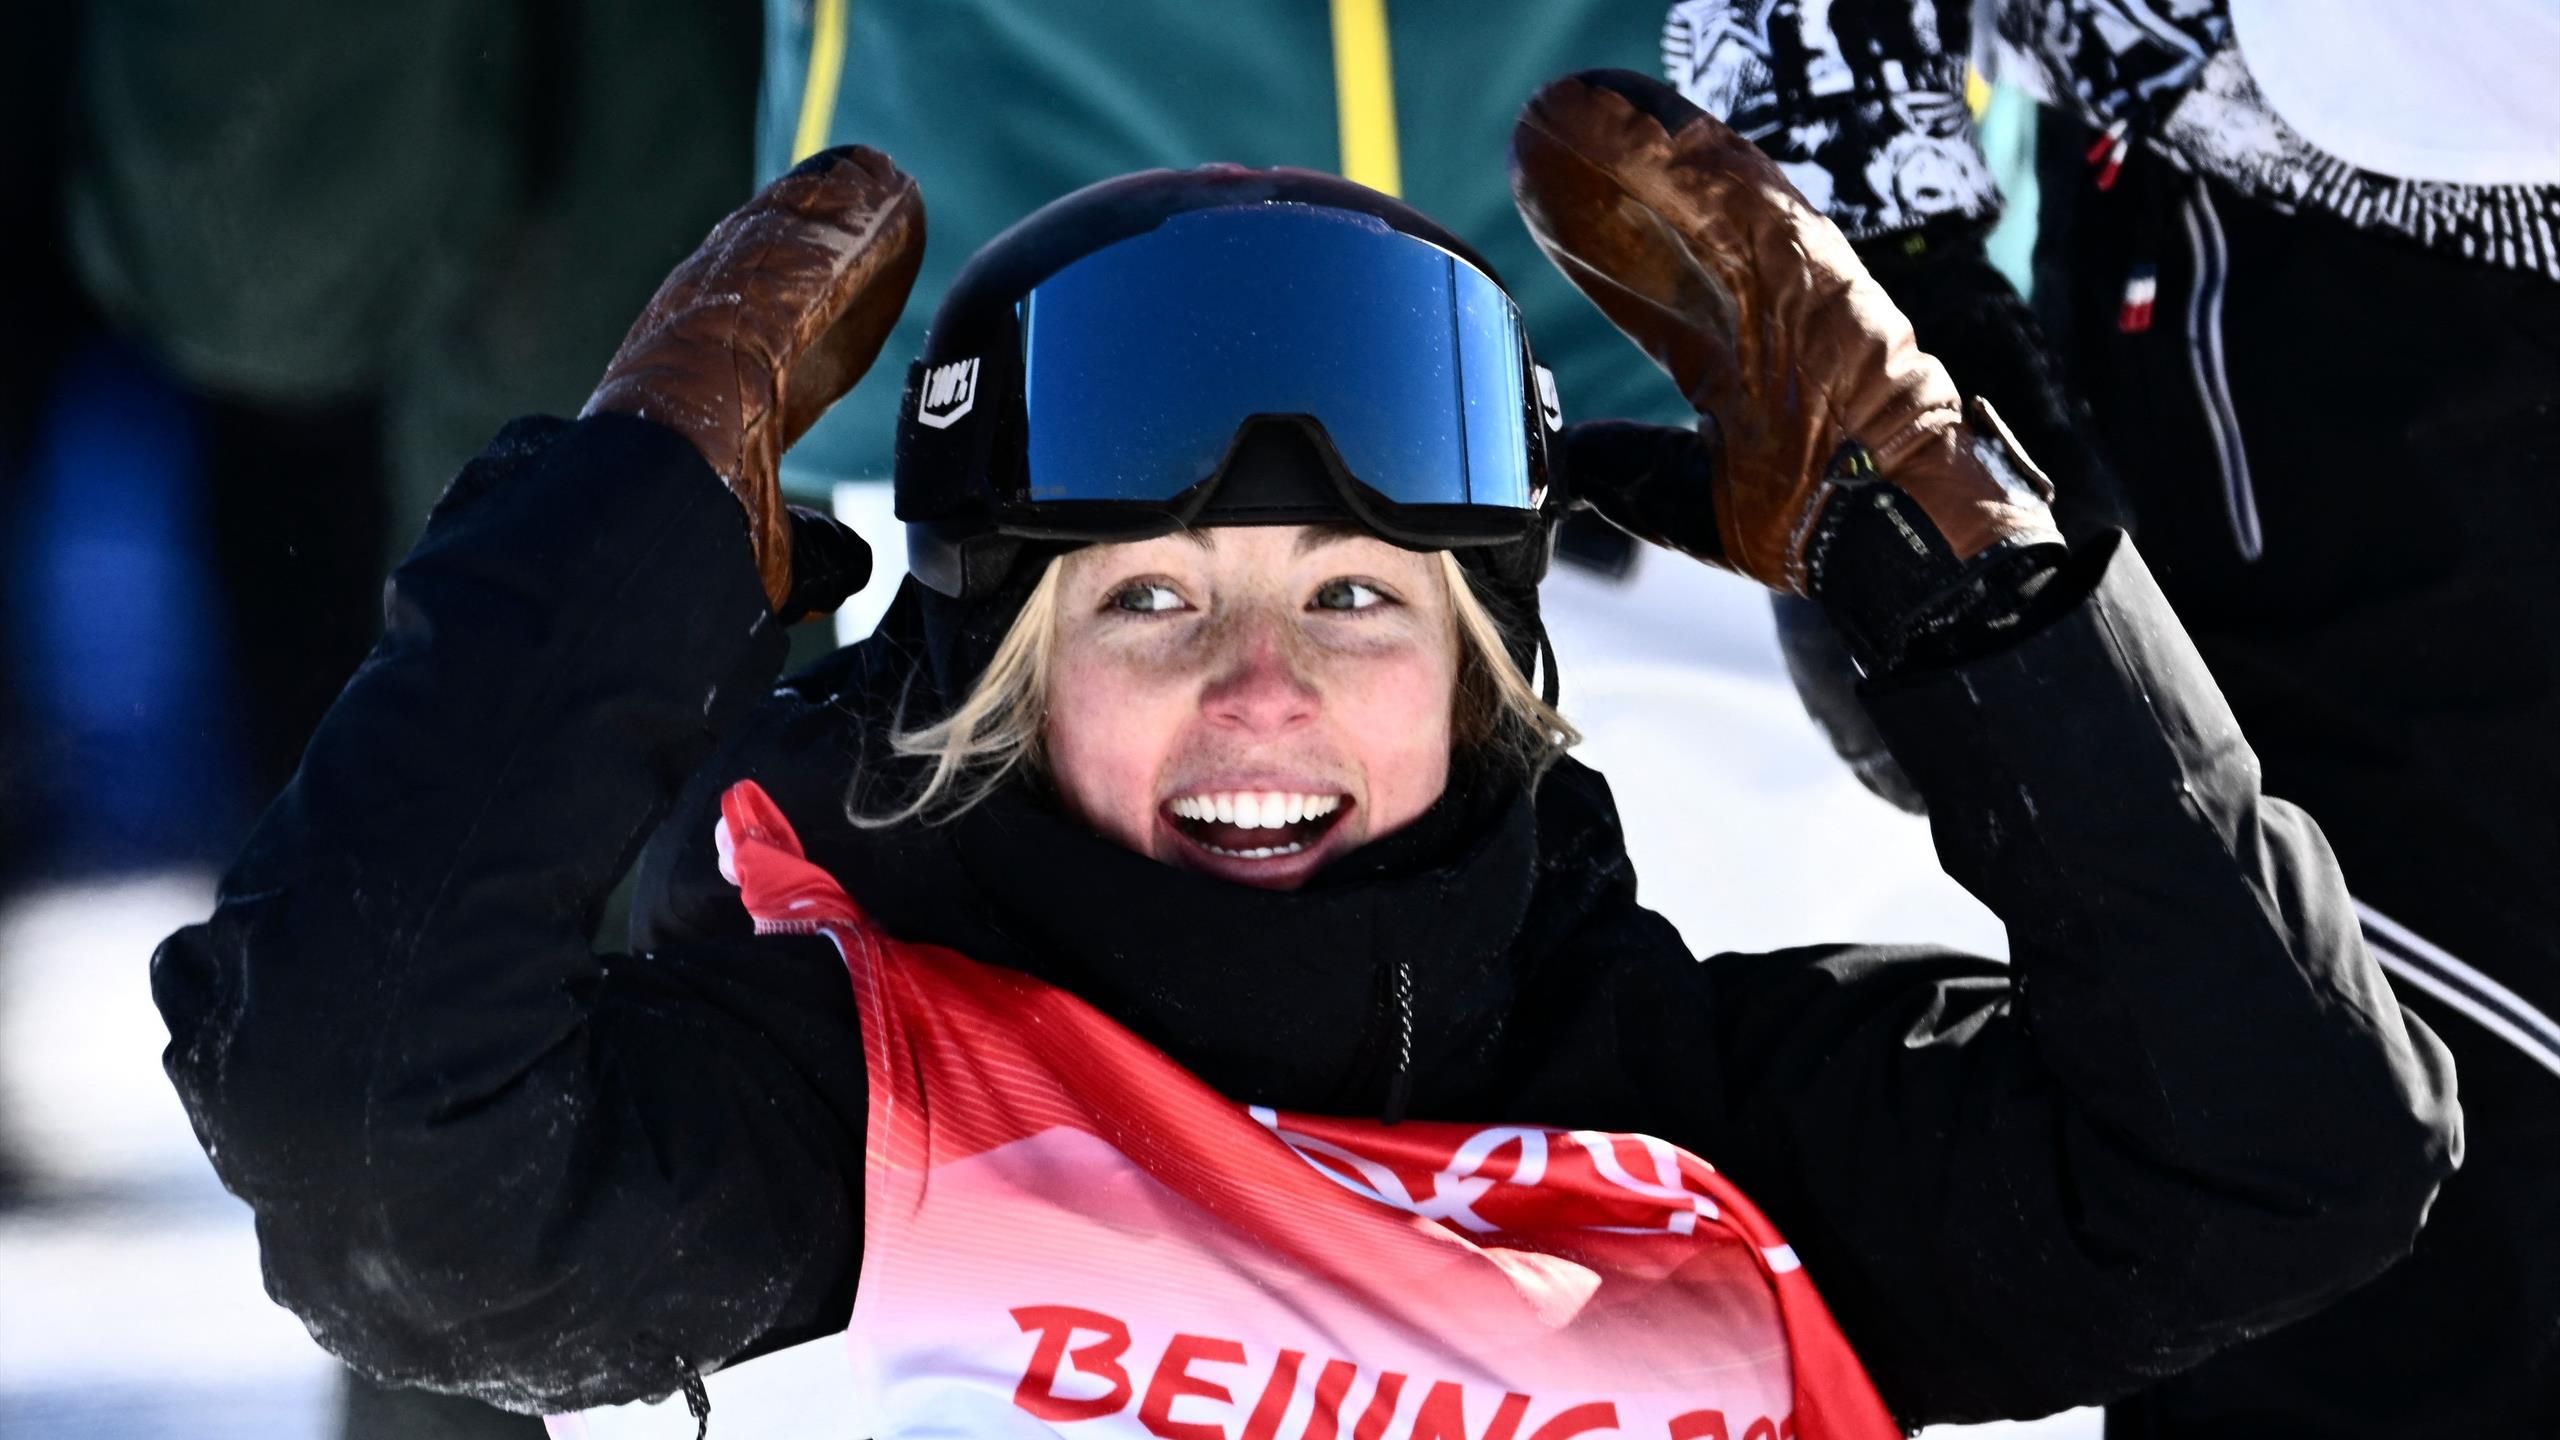 Winter Olympics 2022 - Zoi Sadowski-Synnott claims New Zealands first ever gold in a dramatic slopestyle final